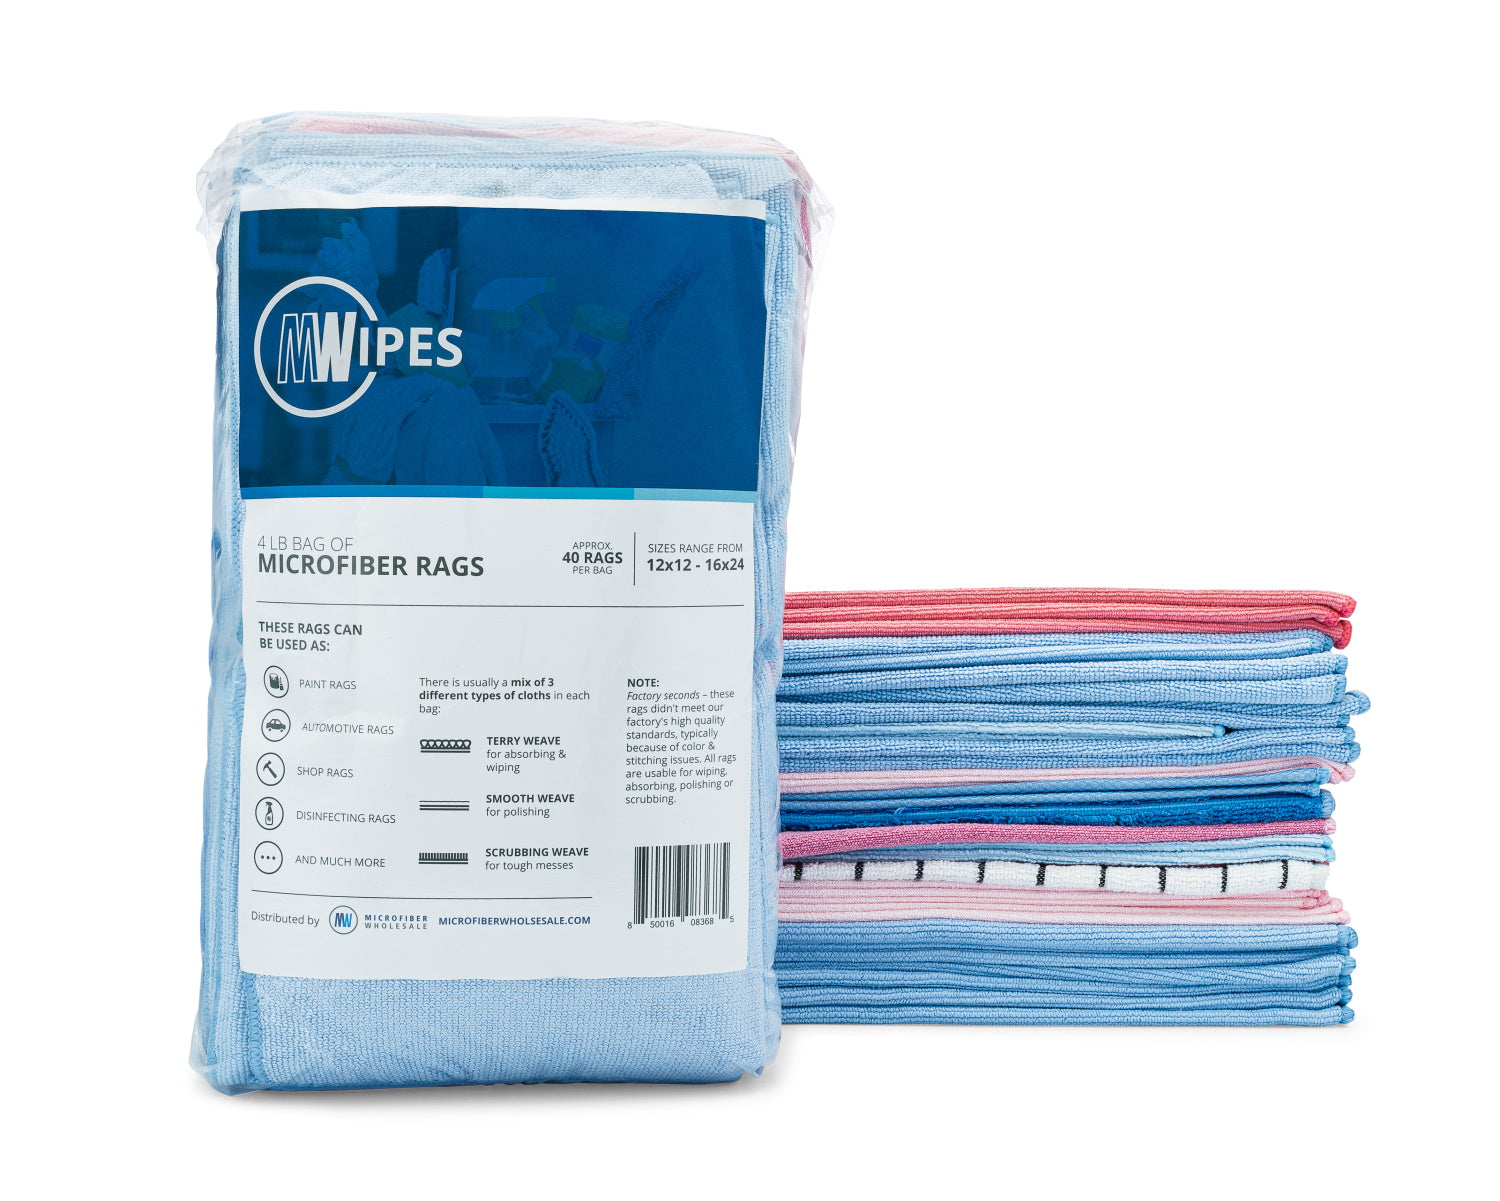 Wholesale cleaning rags for A Cleaner and Dust-Free Environment 